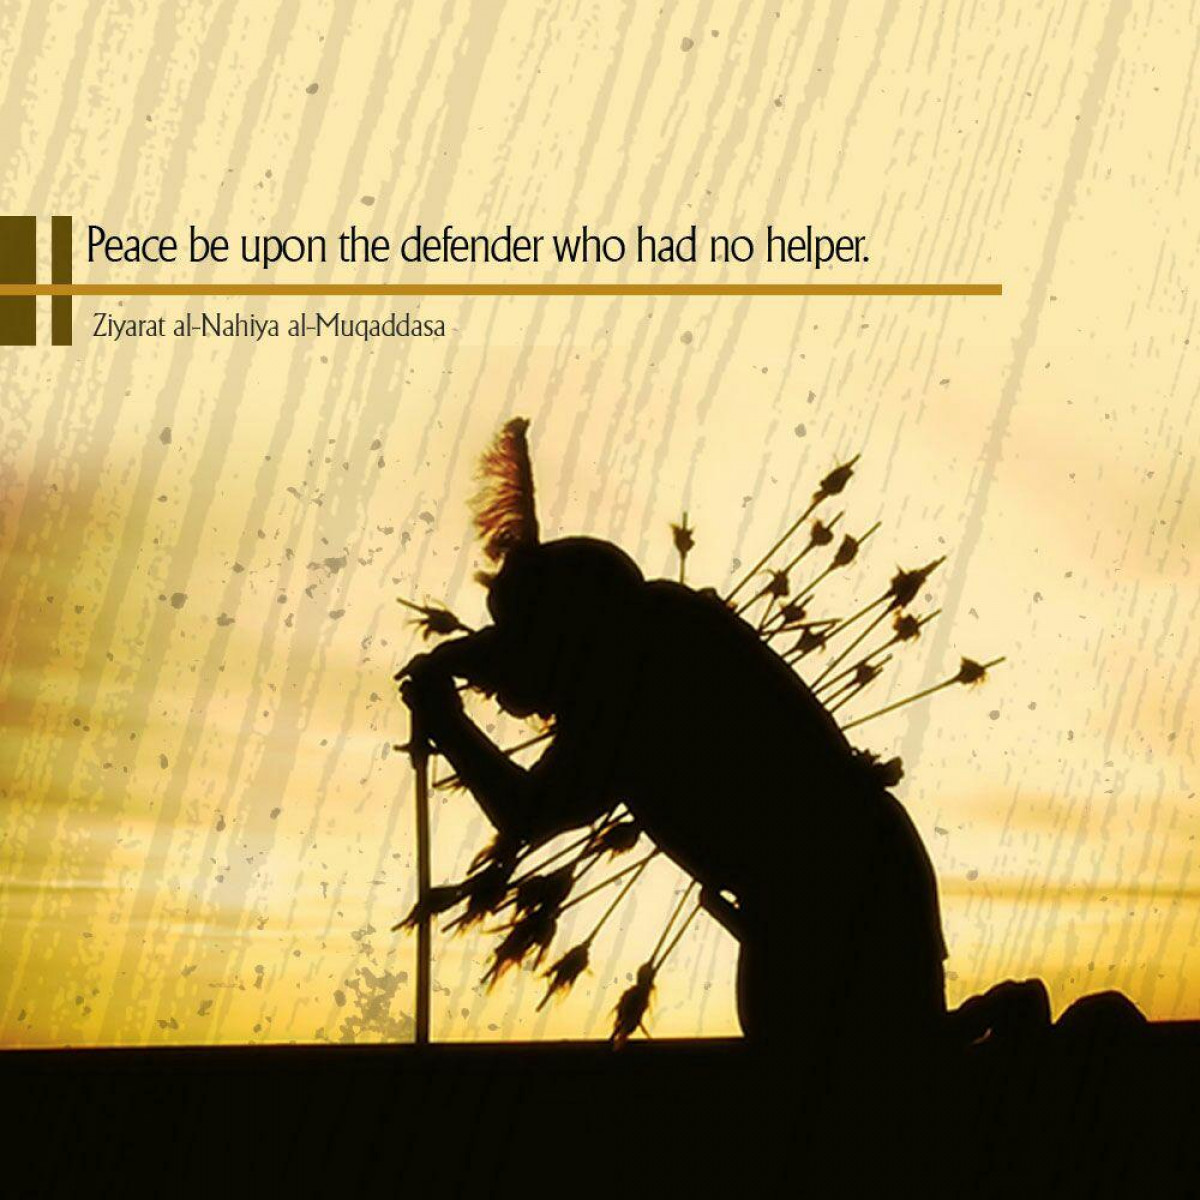 Peace be upon the defender who had no helper